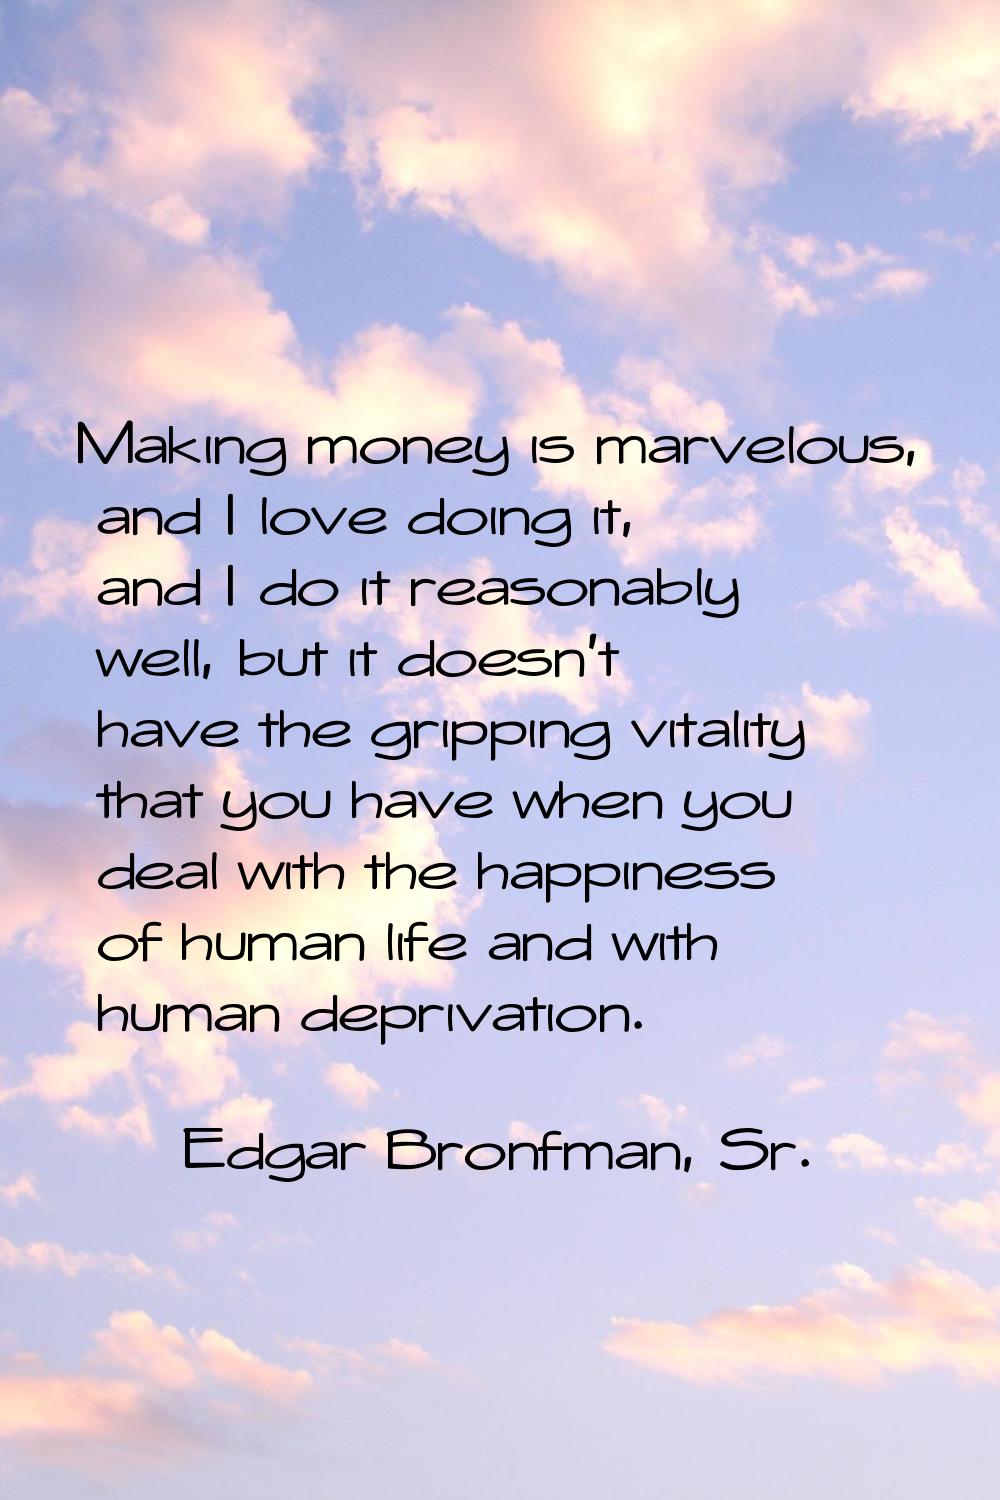 Making money is marvelous, and I love doing it, and I do it reasonably well, but it doesn't have th